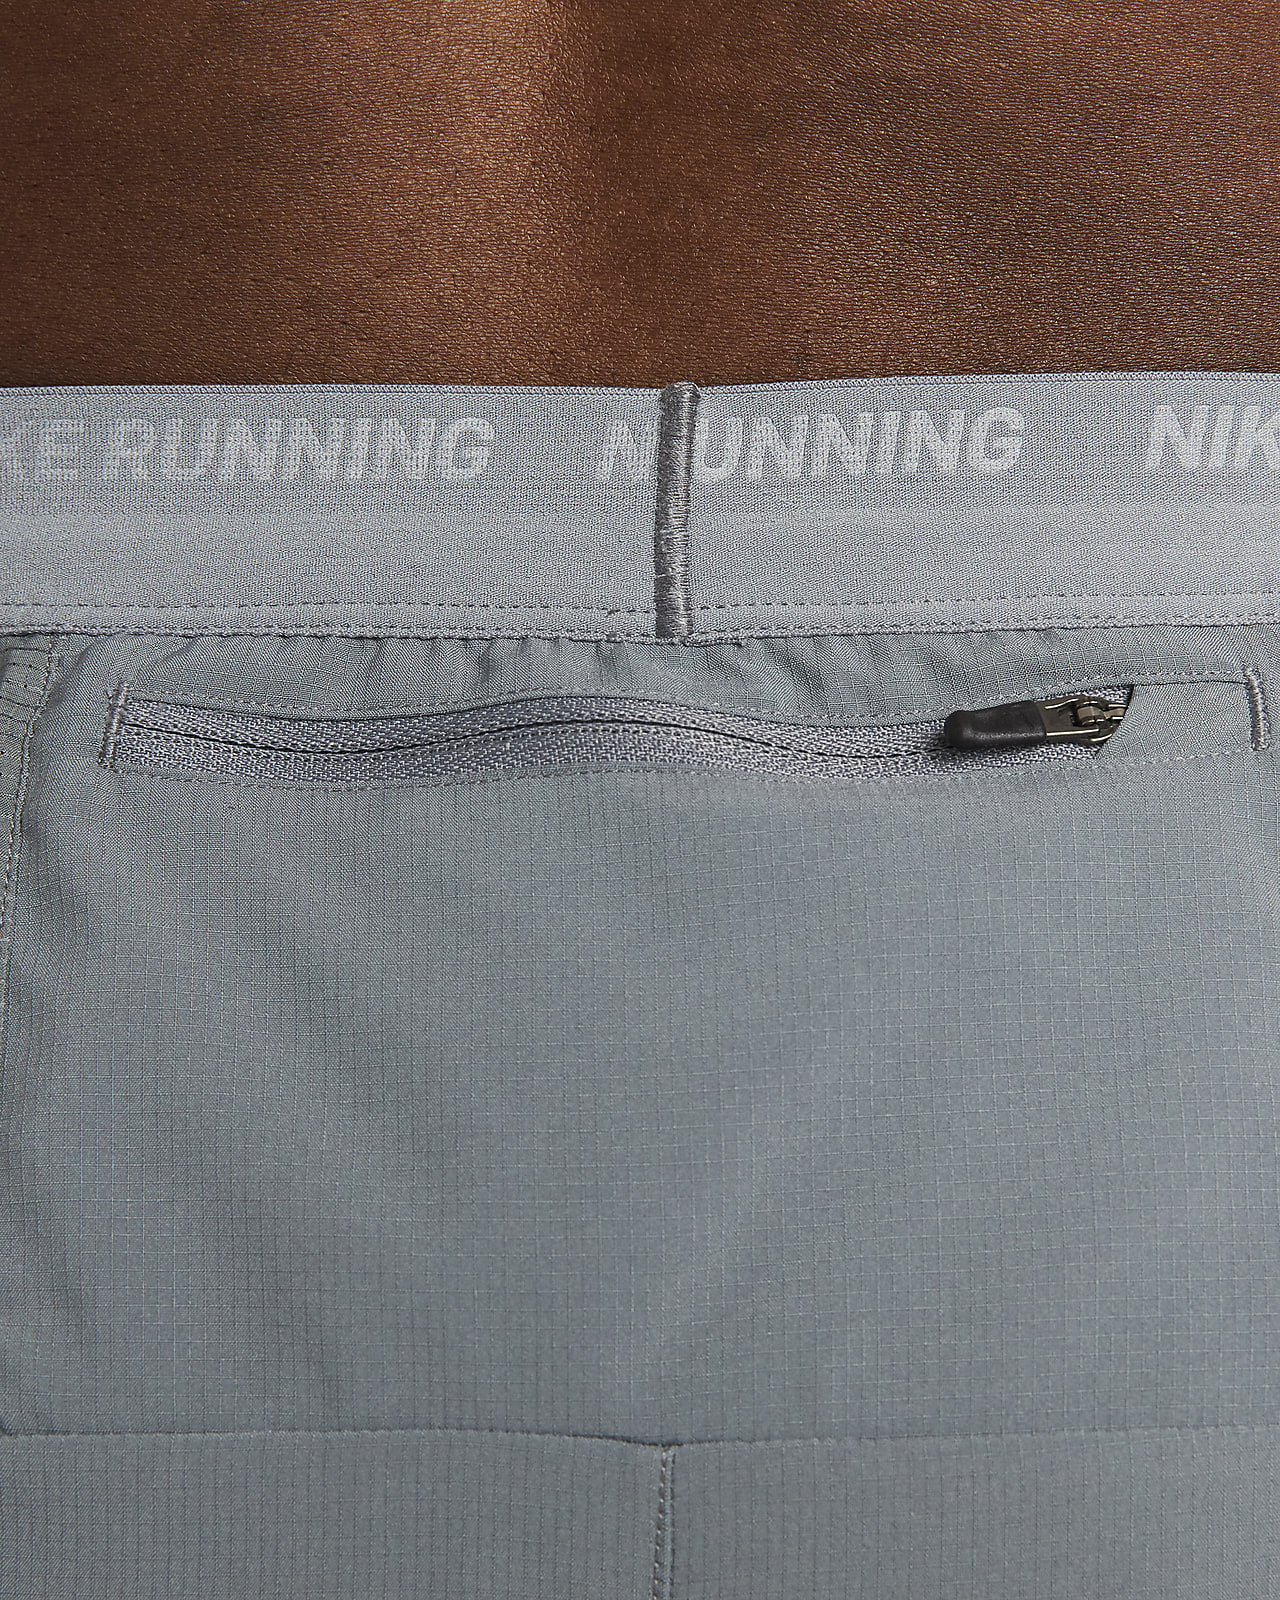 Nike Stride Men's Dri-FIT 13cm (approx.) Brief-Lined Running Shorts